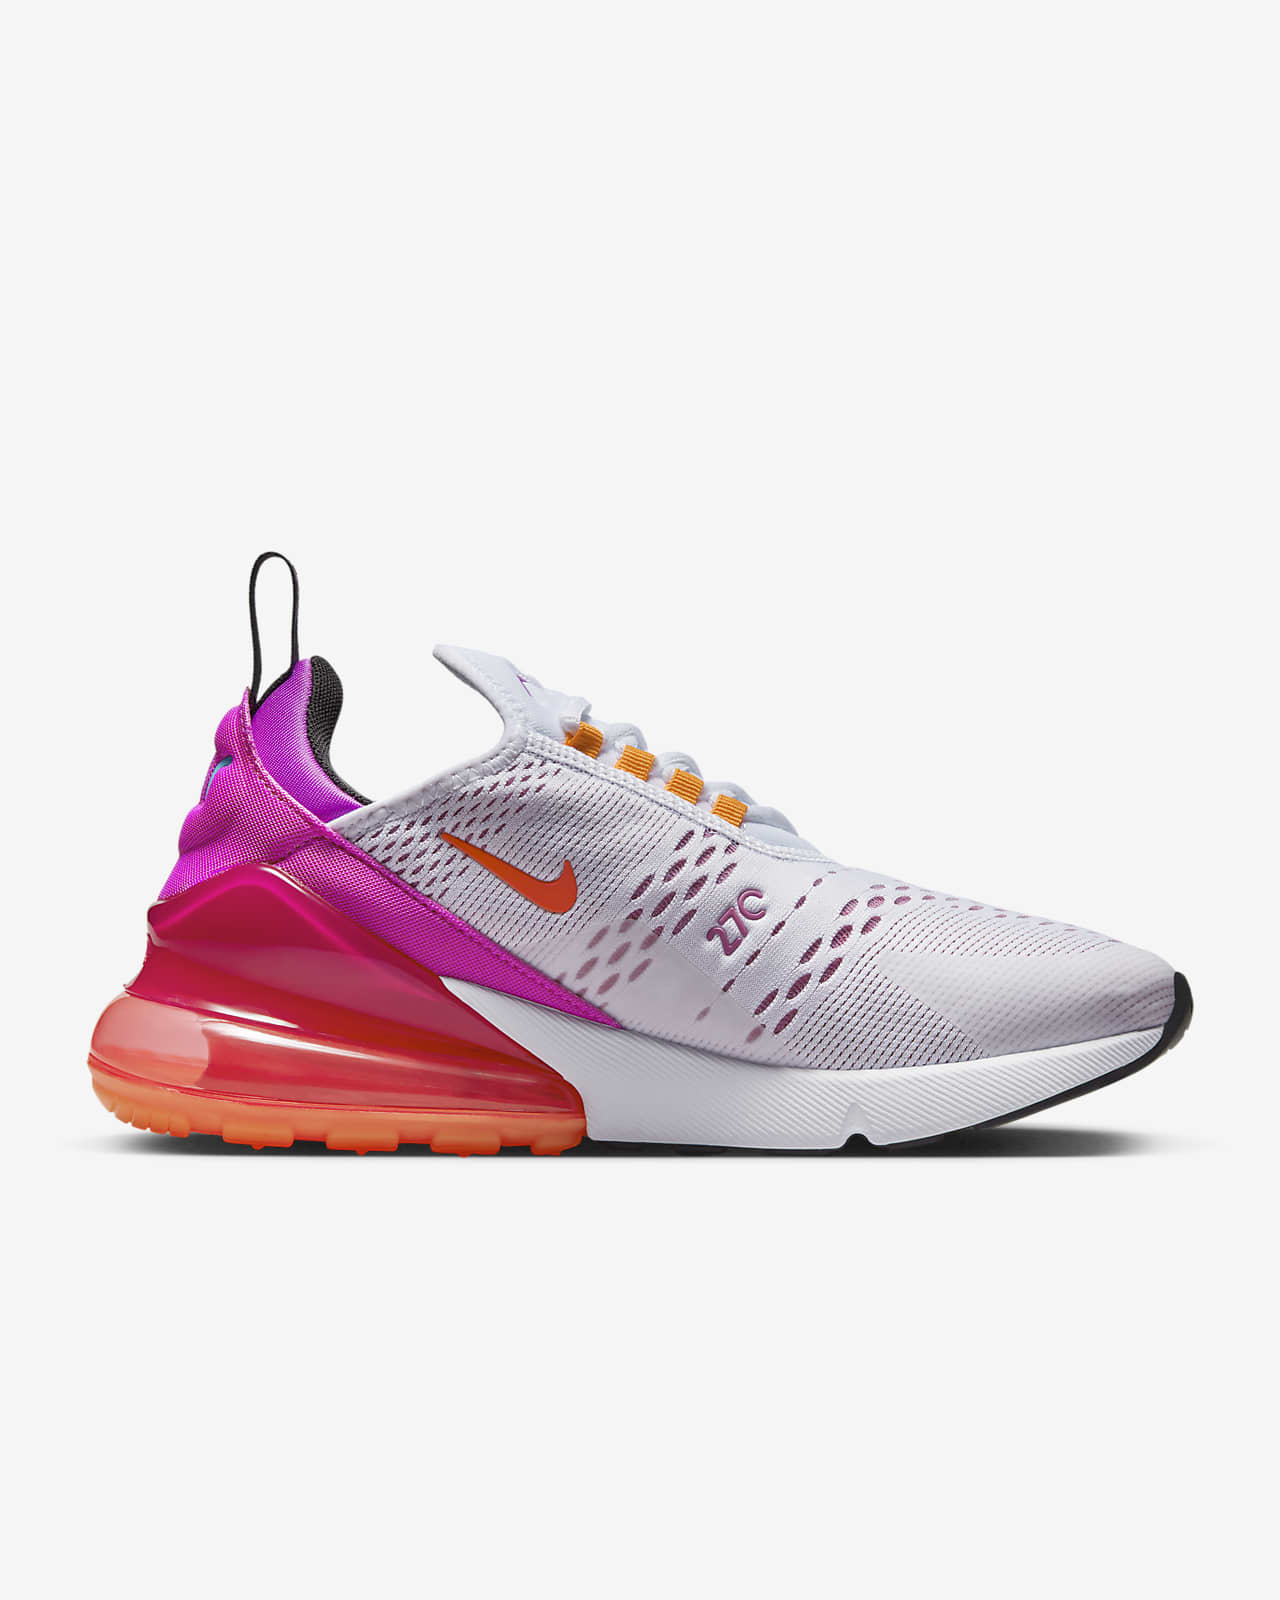 size 7 women's nike air max 270 shoes